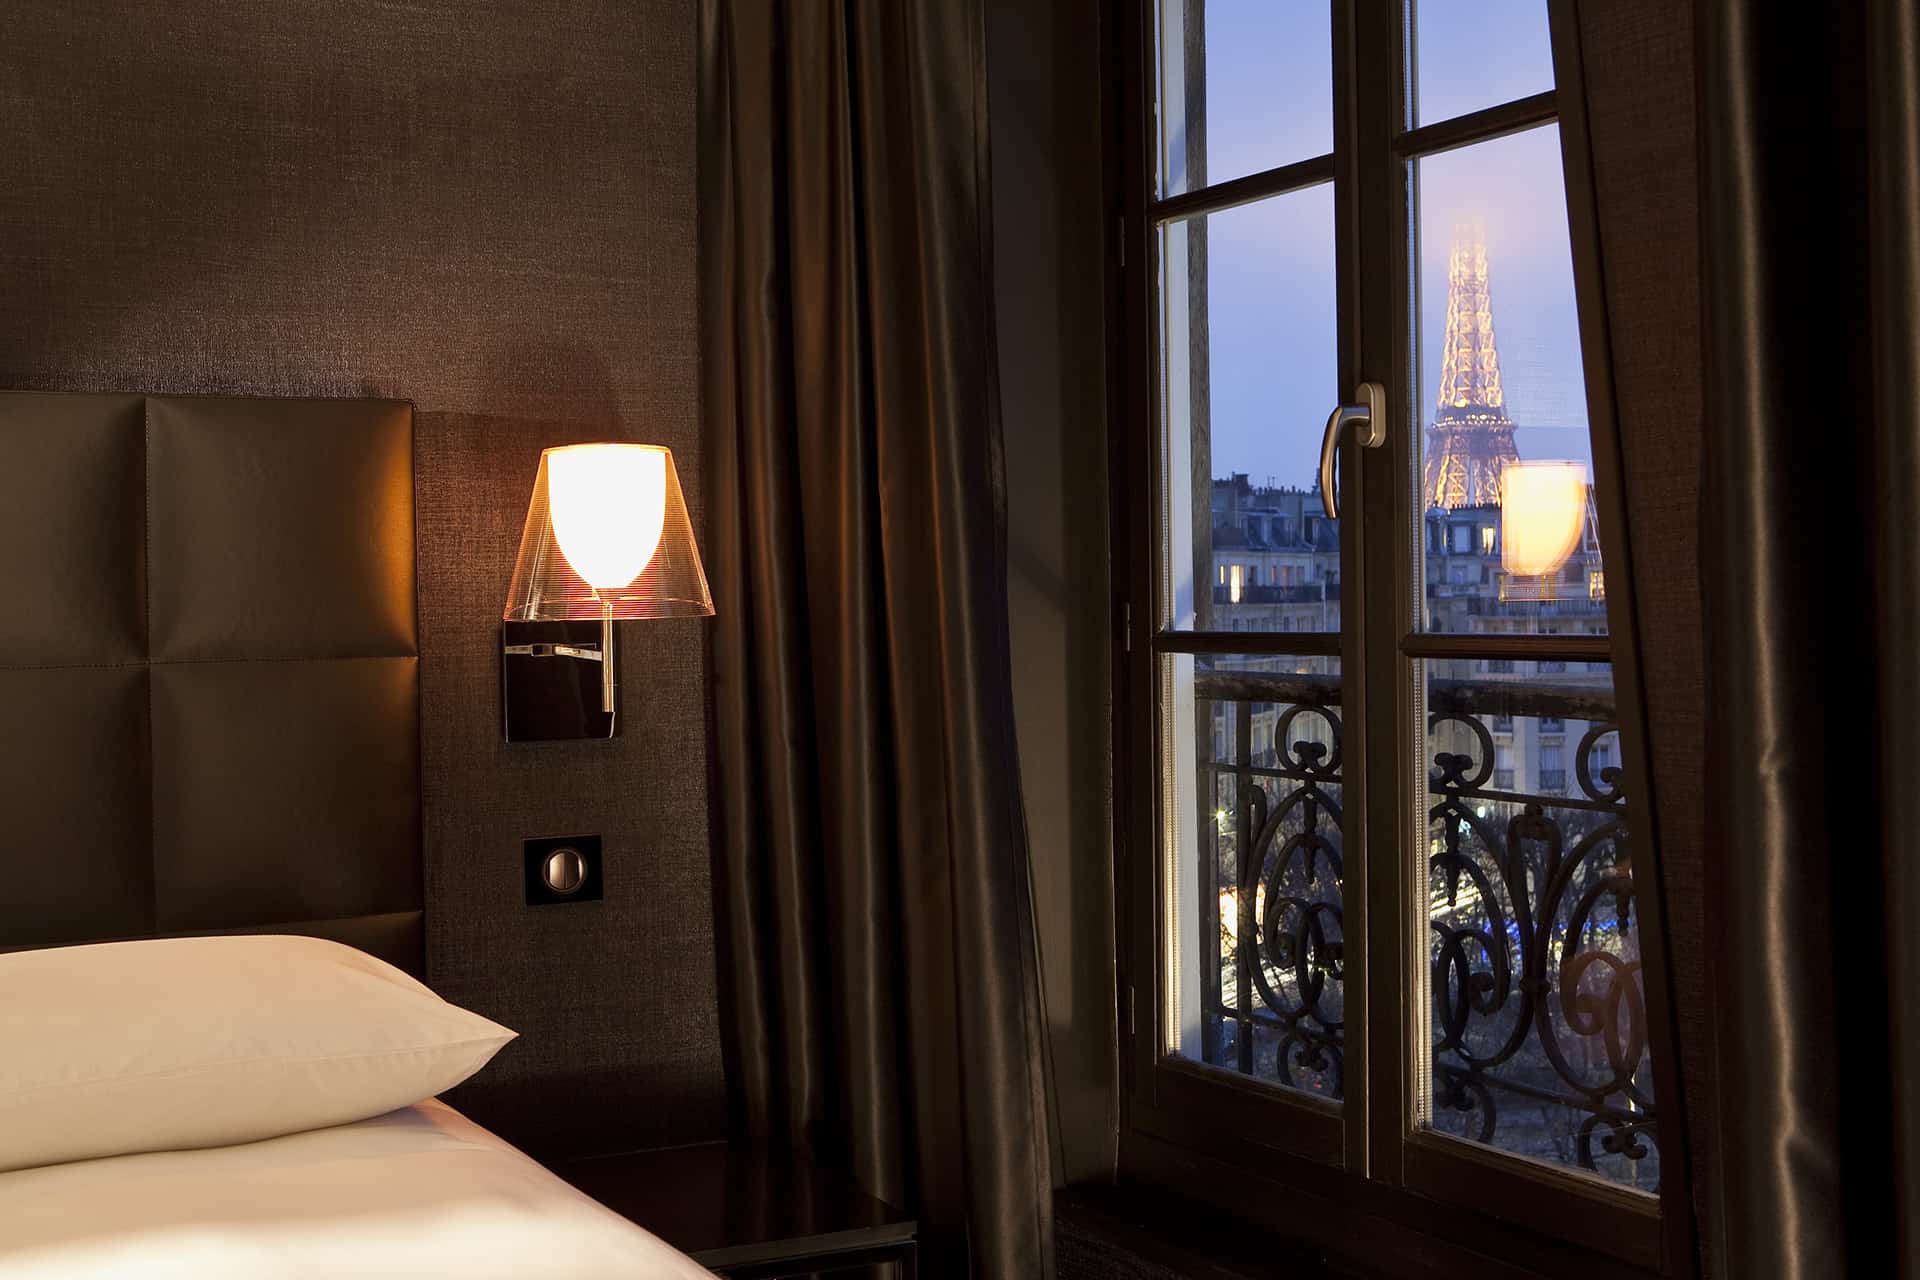 Hotels in Paris You Can Wake Up To Views Of The Eiffel Tower From €18/Night  - Klook Travel Blog